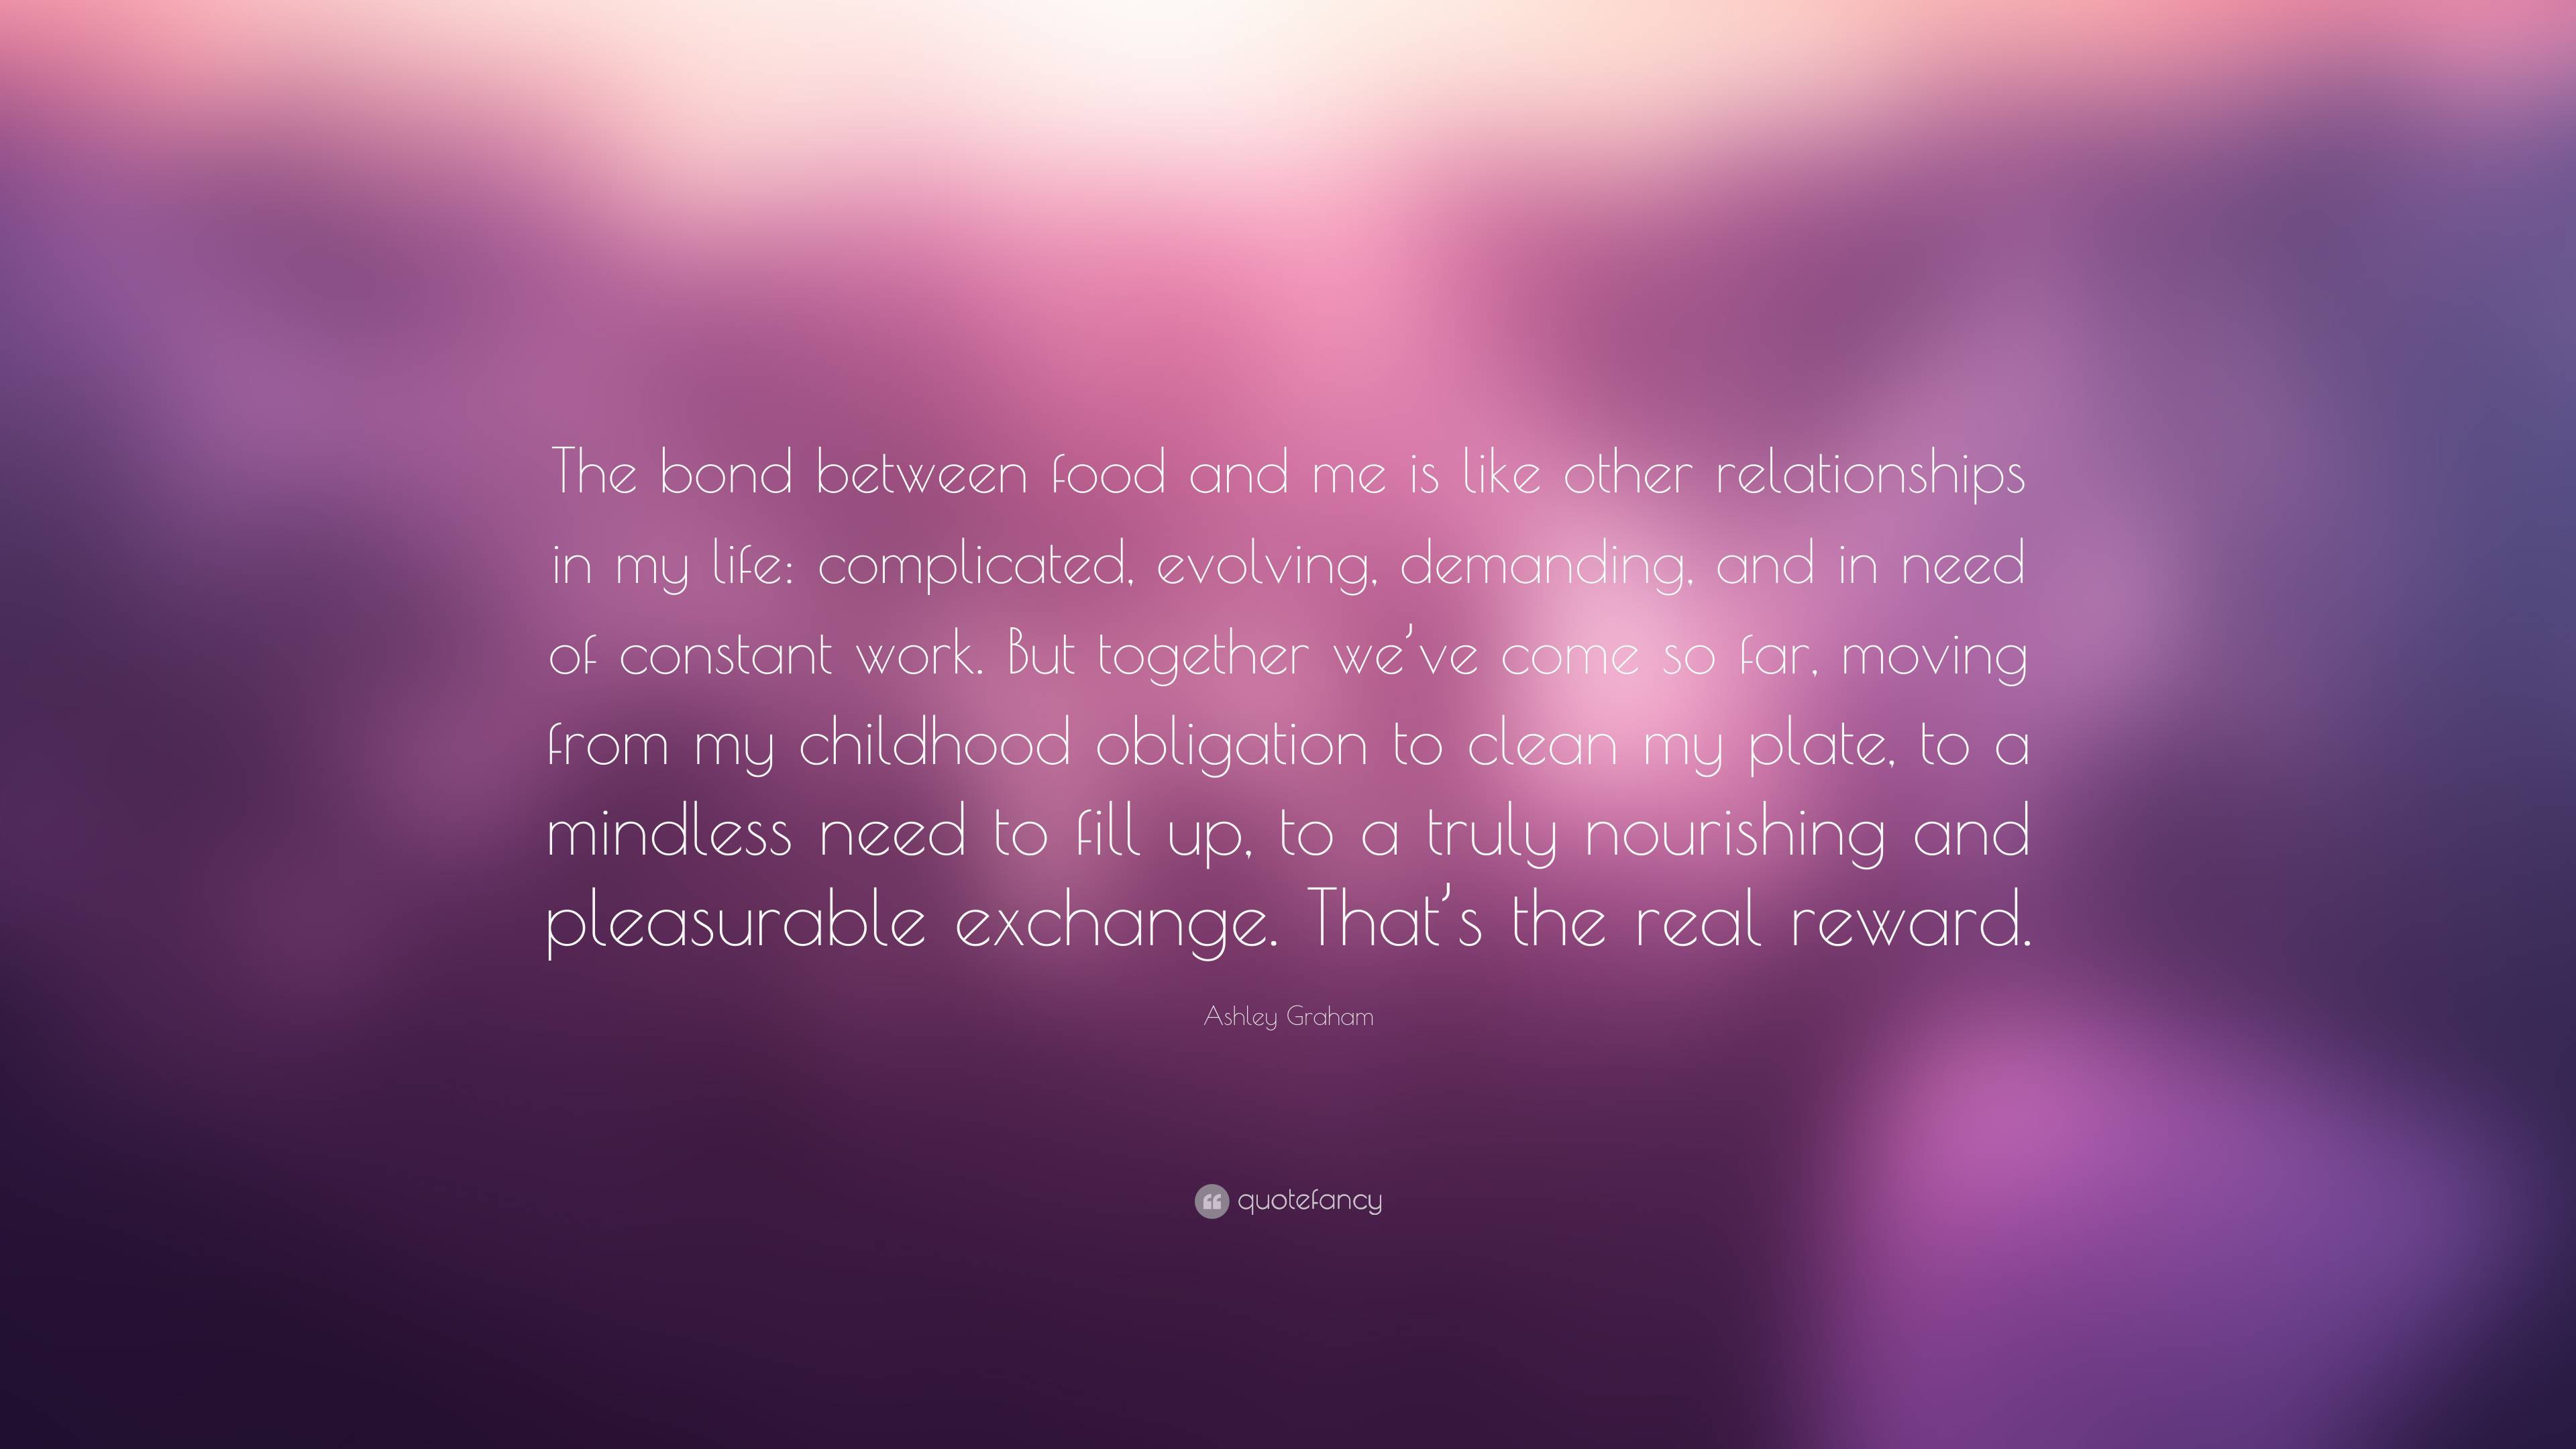 Ashley Graham Quote: “The bond between food and me is like other ...